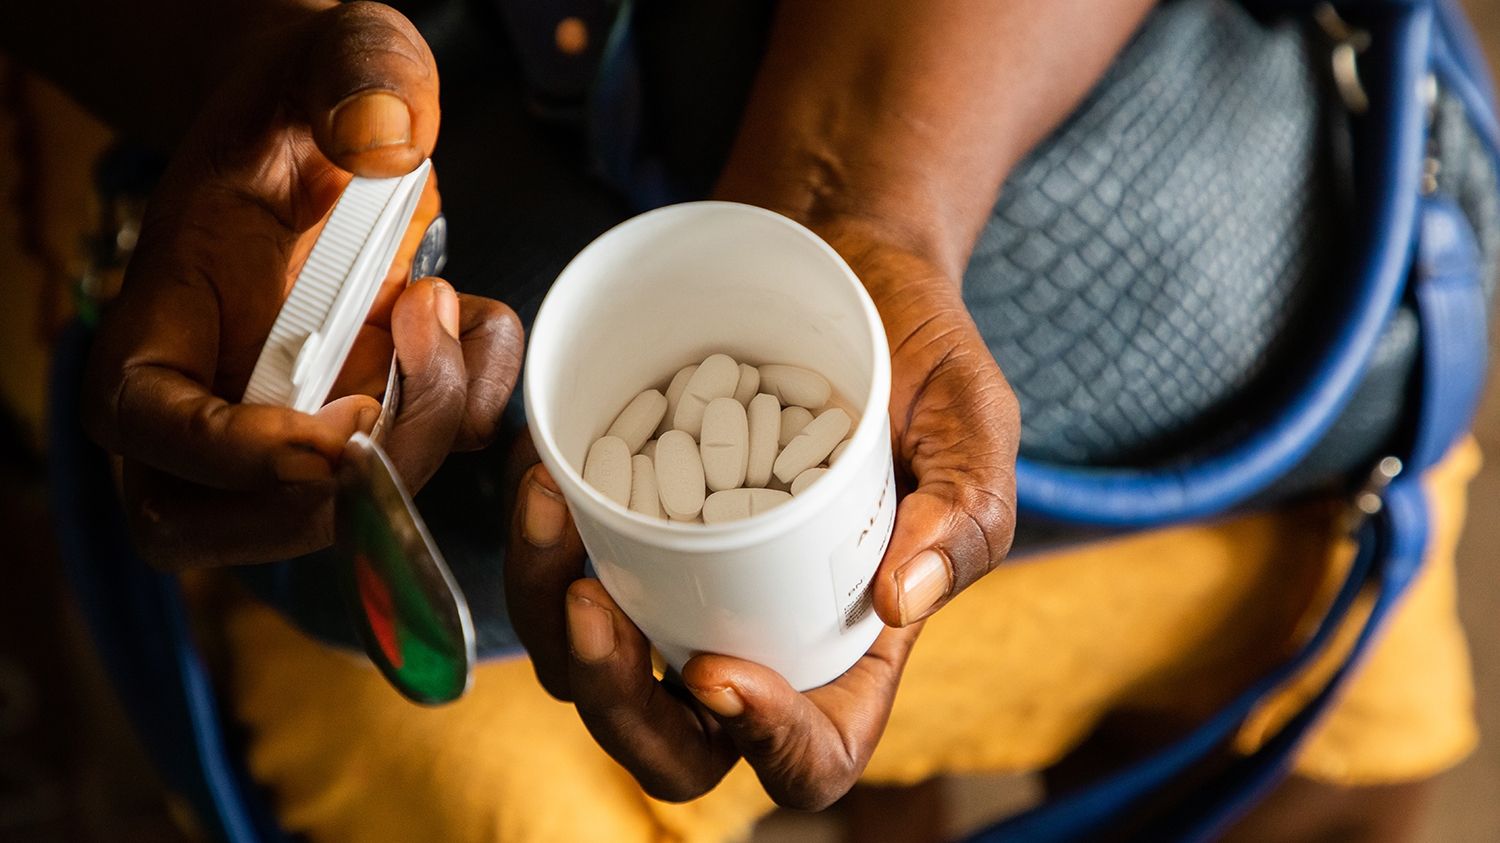 A close-up of a volunteer's hands holding medication that treats intestinal worms.